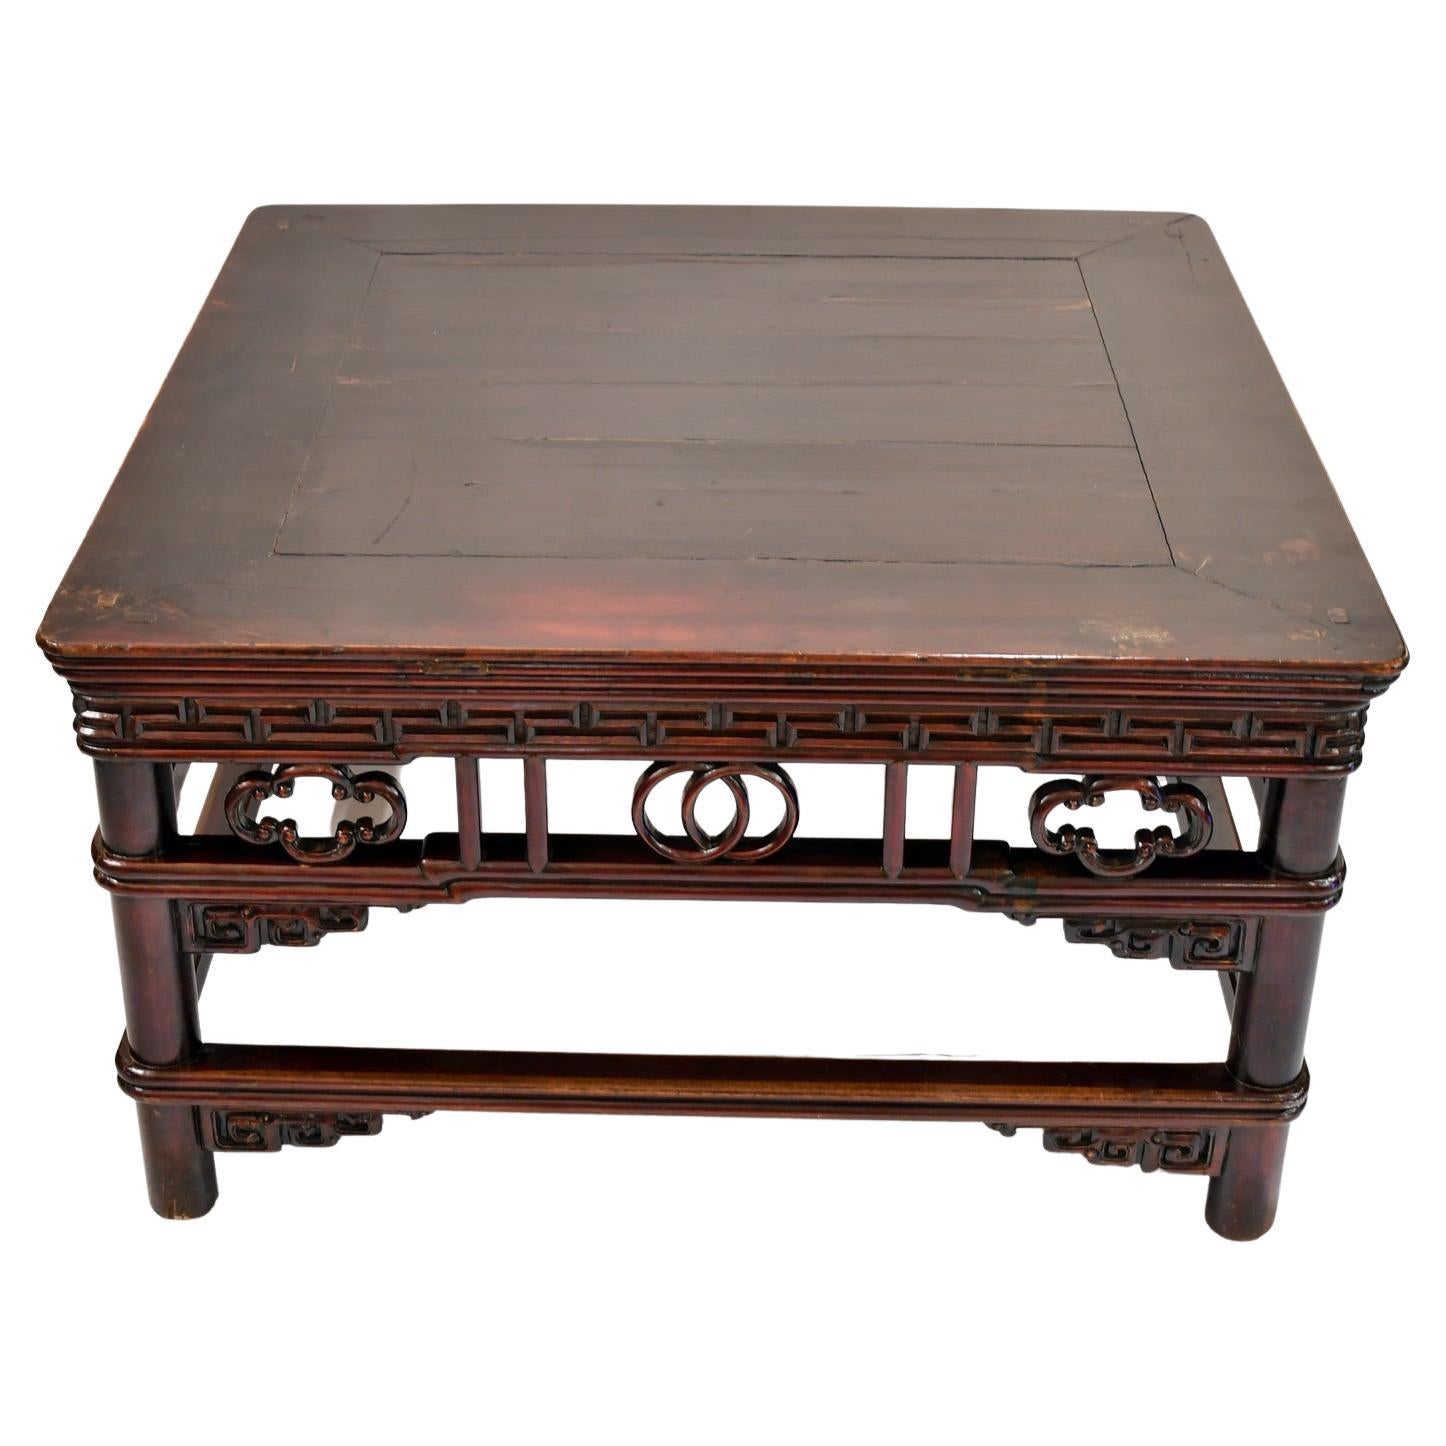 From the Shanxi province, a very beautiful Chinese Qing table that was lowered to function as a coffee table and offers a square top with double wrap-around stretchers & decorative braces. Made of hardwood & painted with a rich cinnabar-color paint.